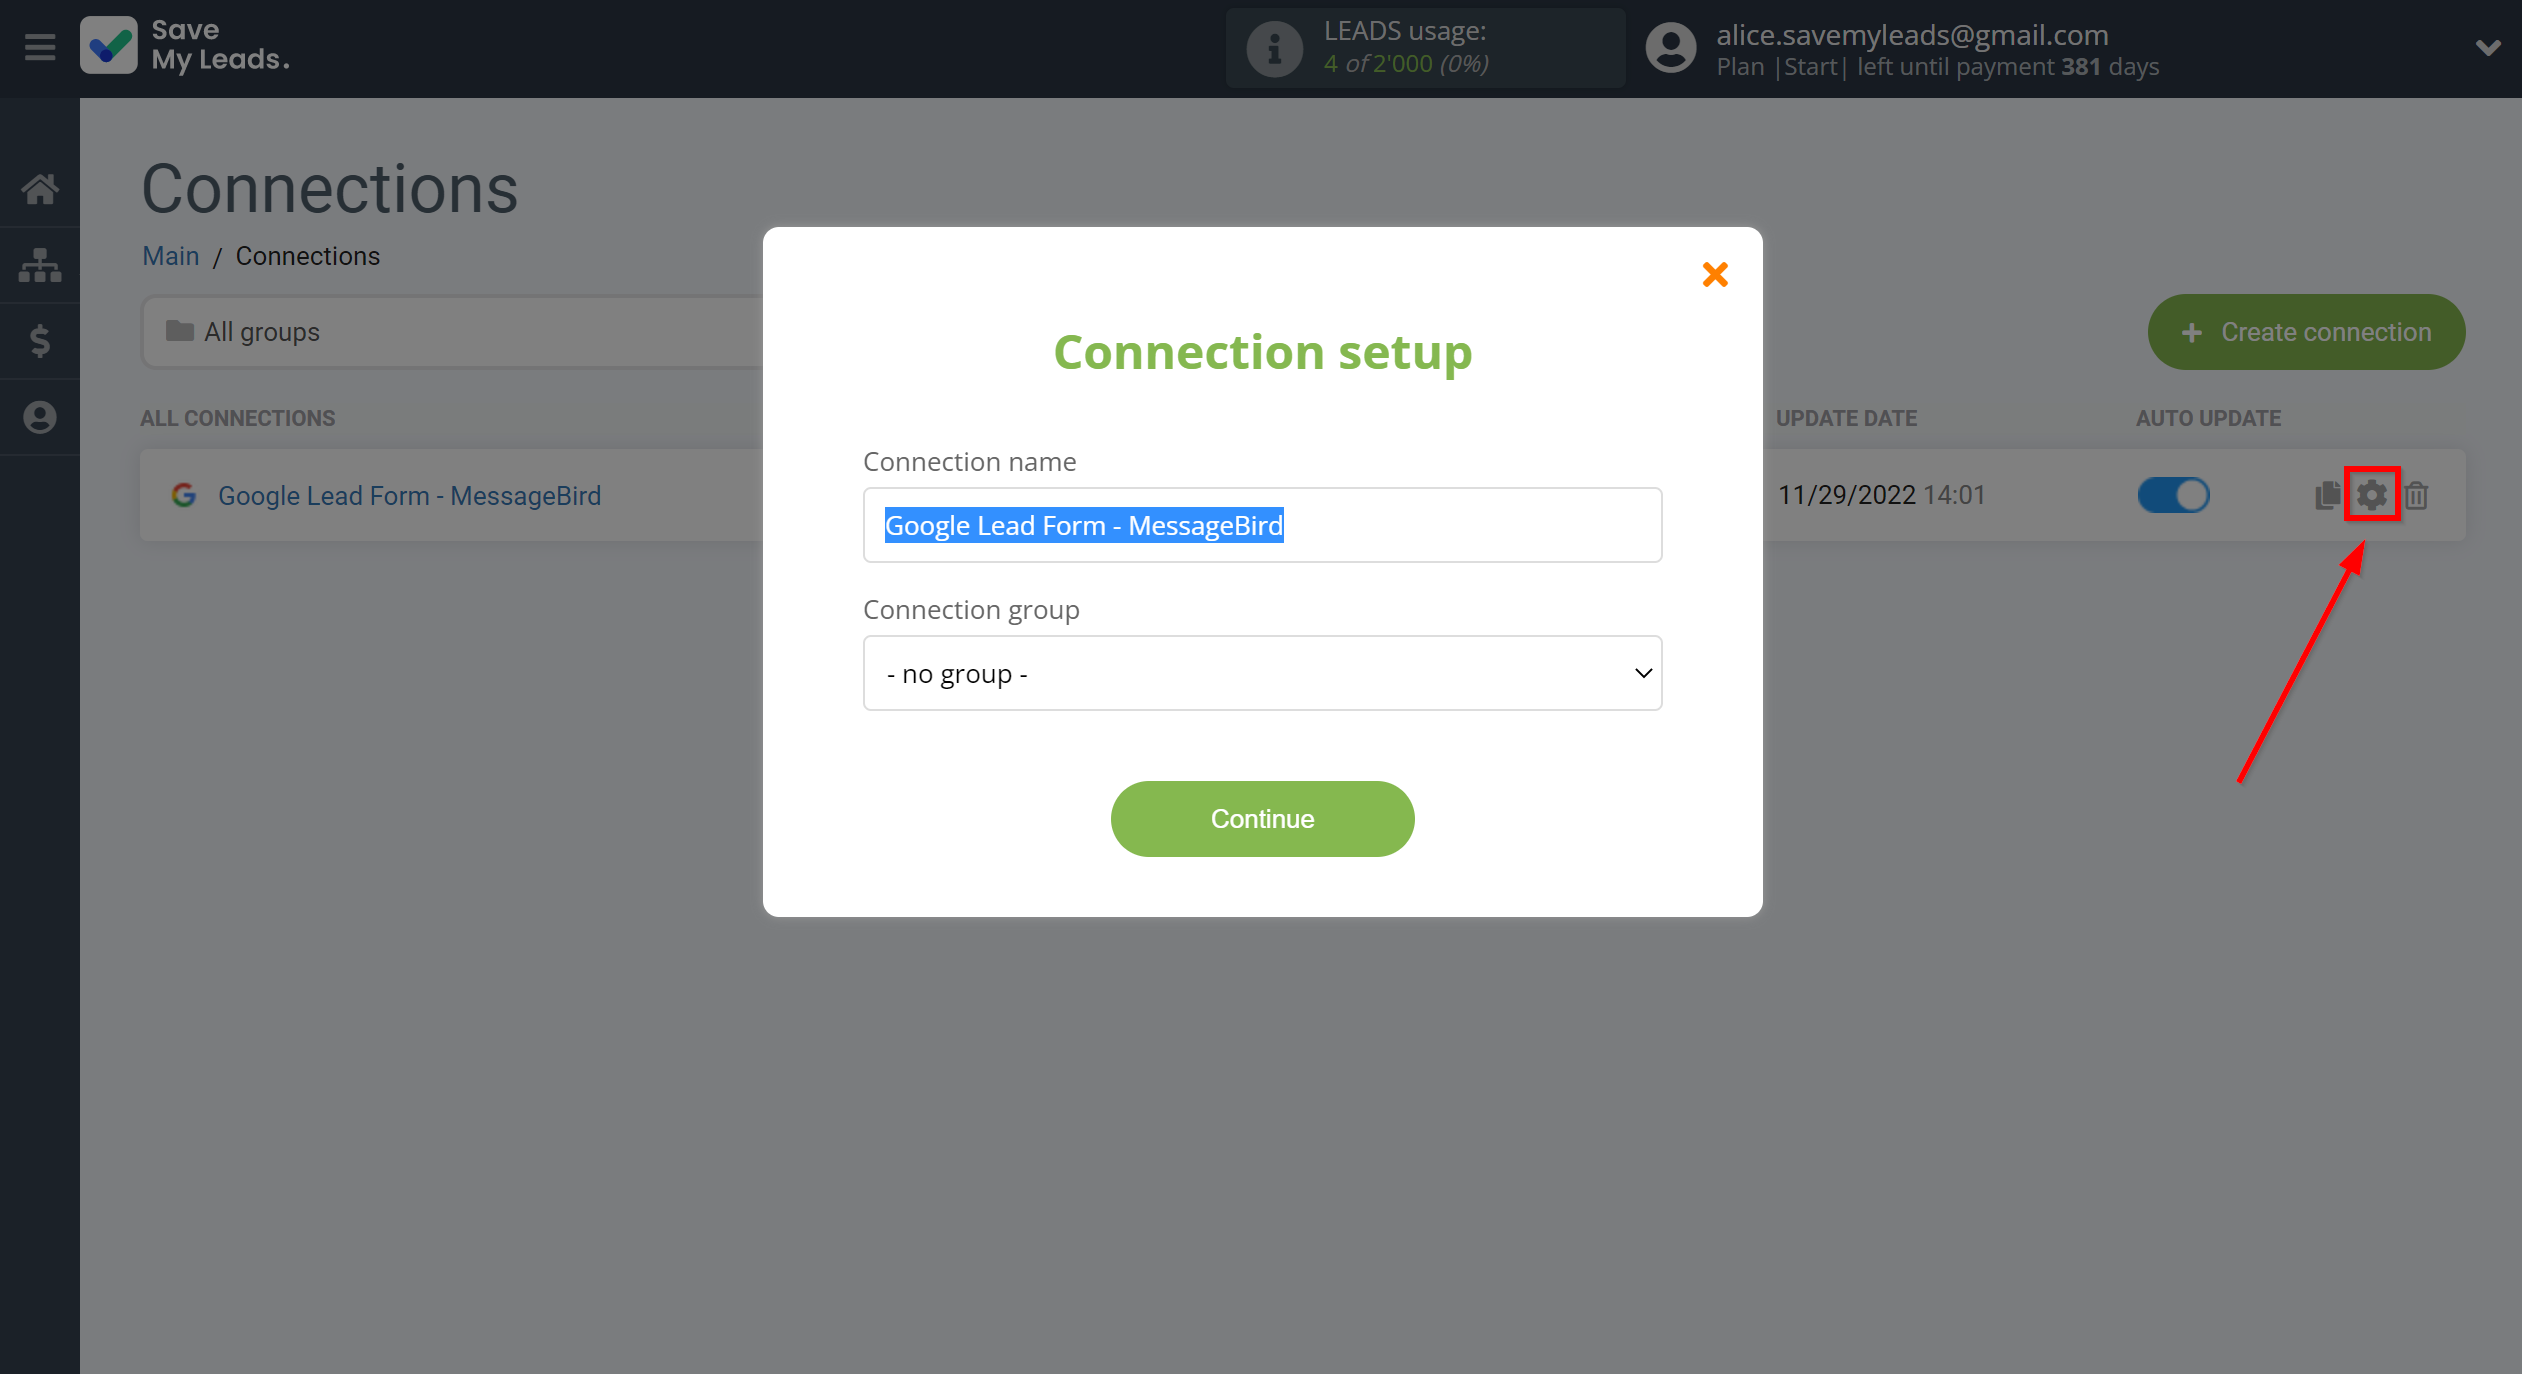 How to Connect Google Lead Form with MessageBird | Name and group connection